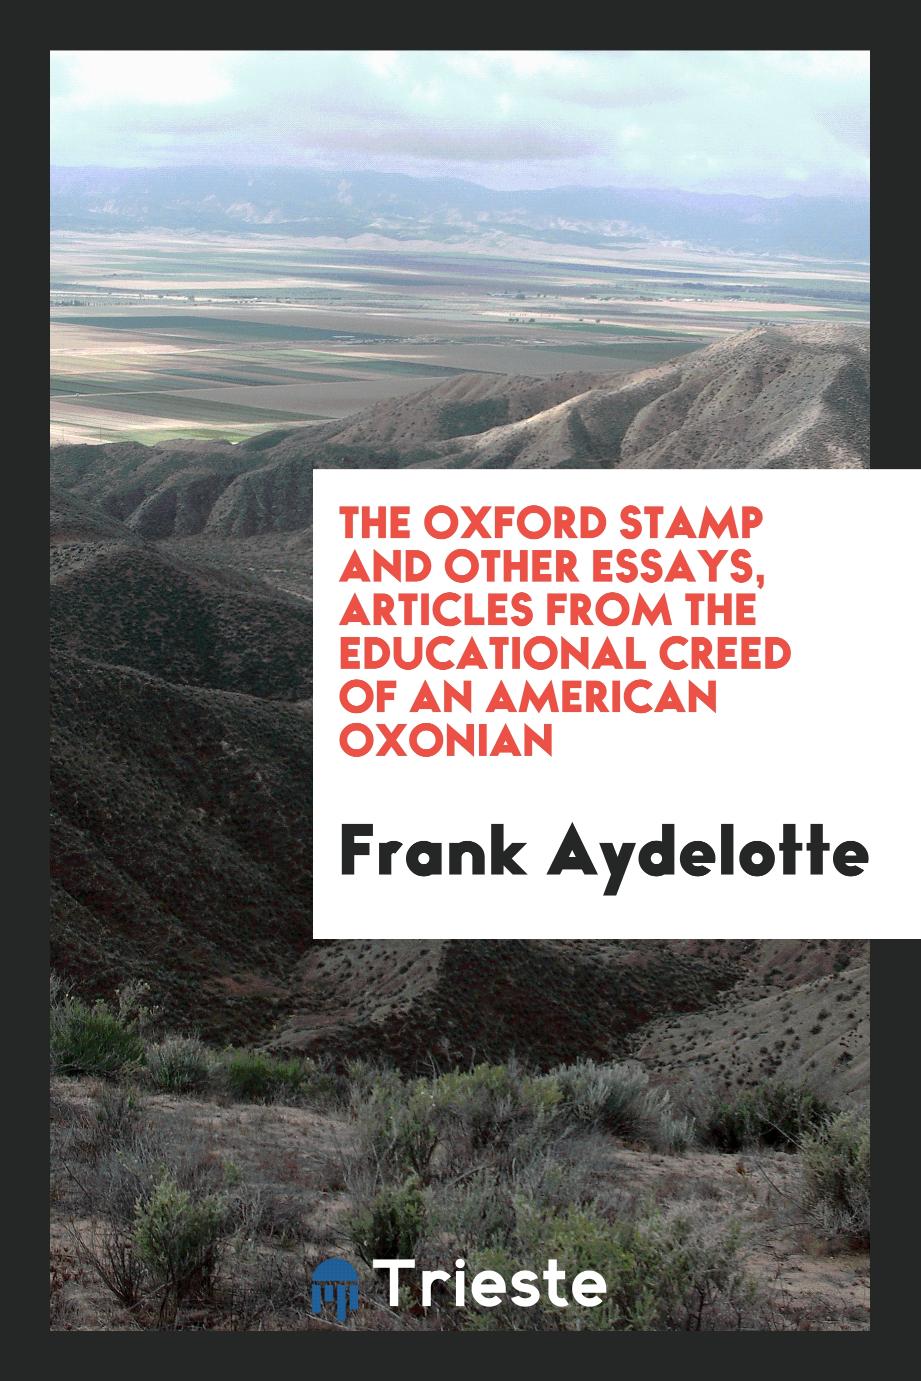 The Oxford Stamp and other essays, articles from the educational creed of an American Oxonian